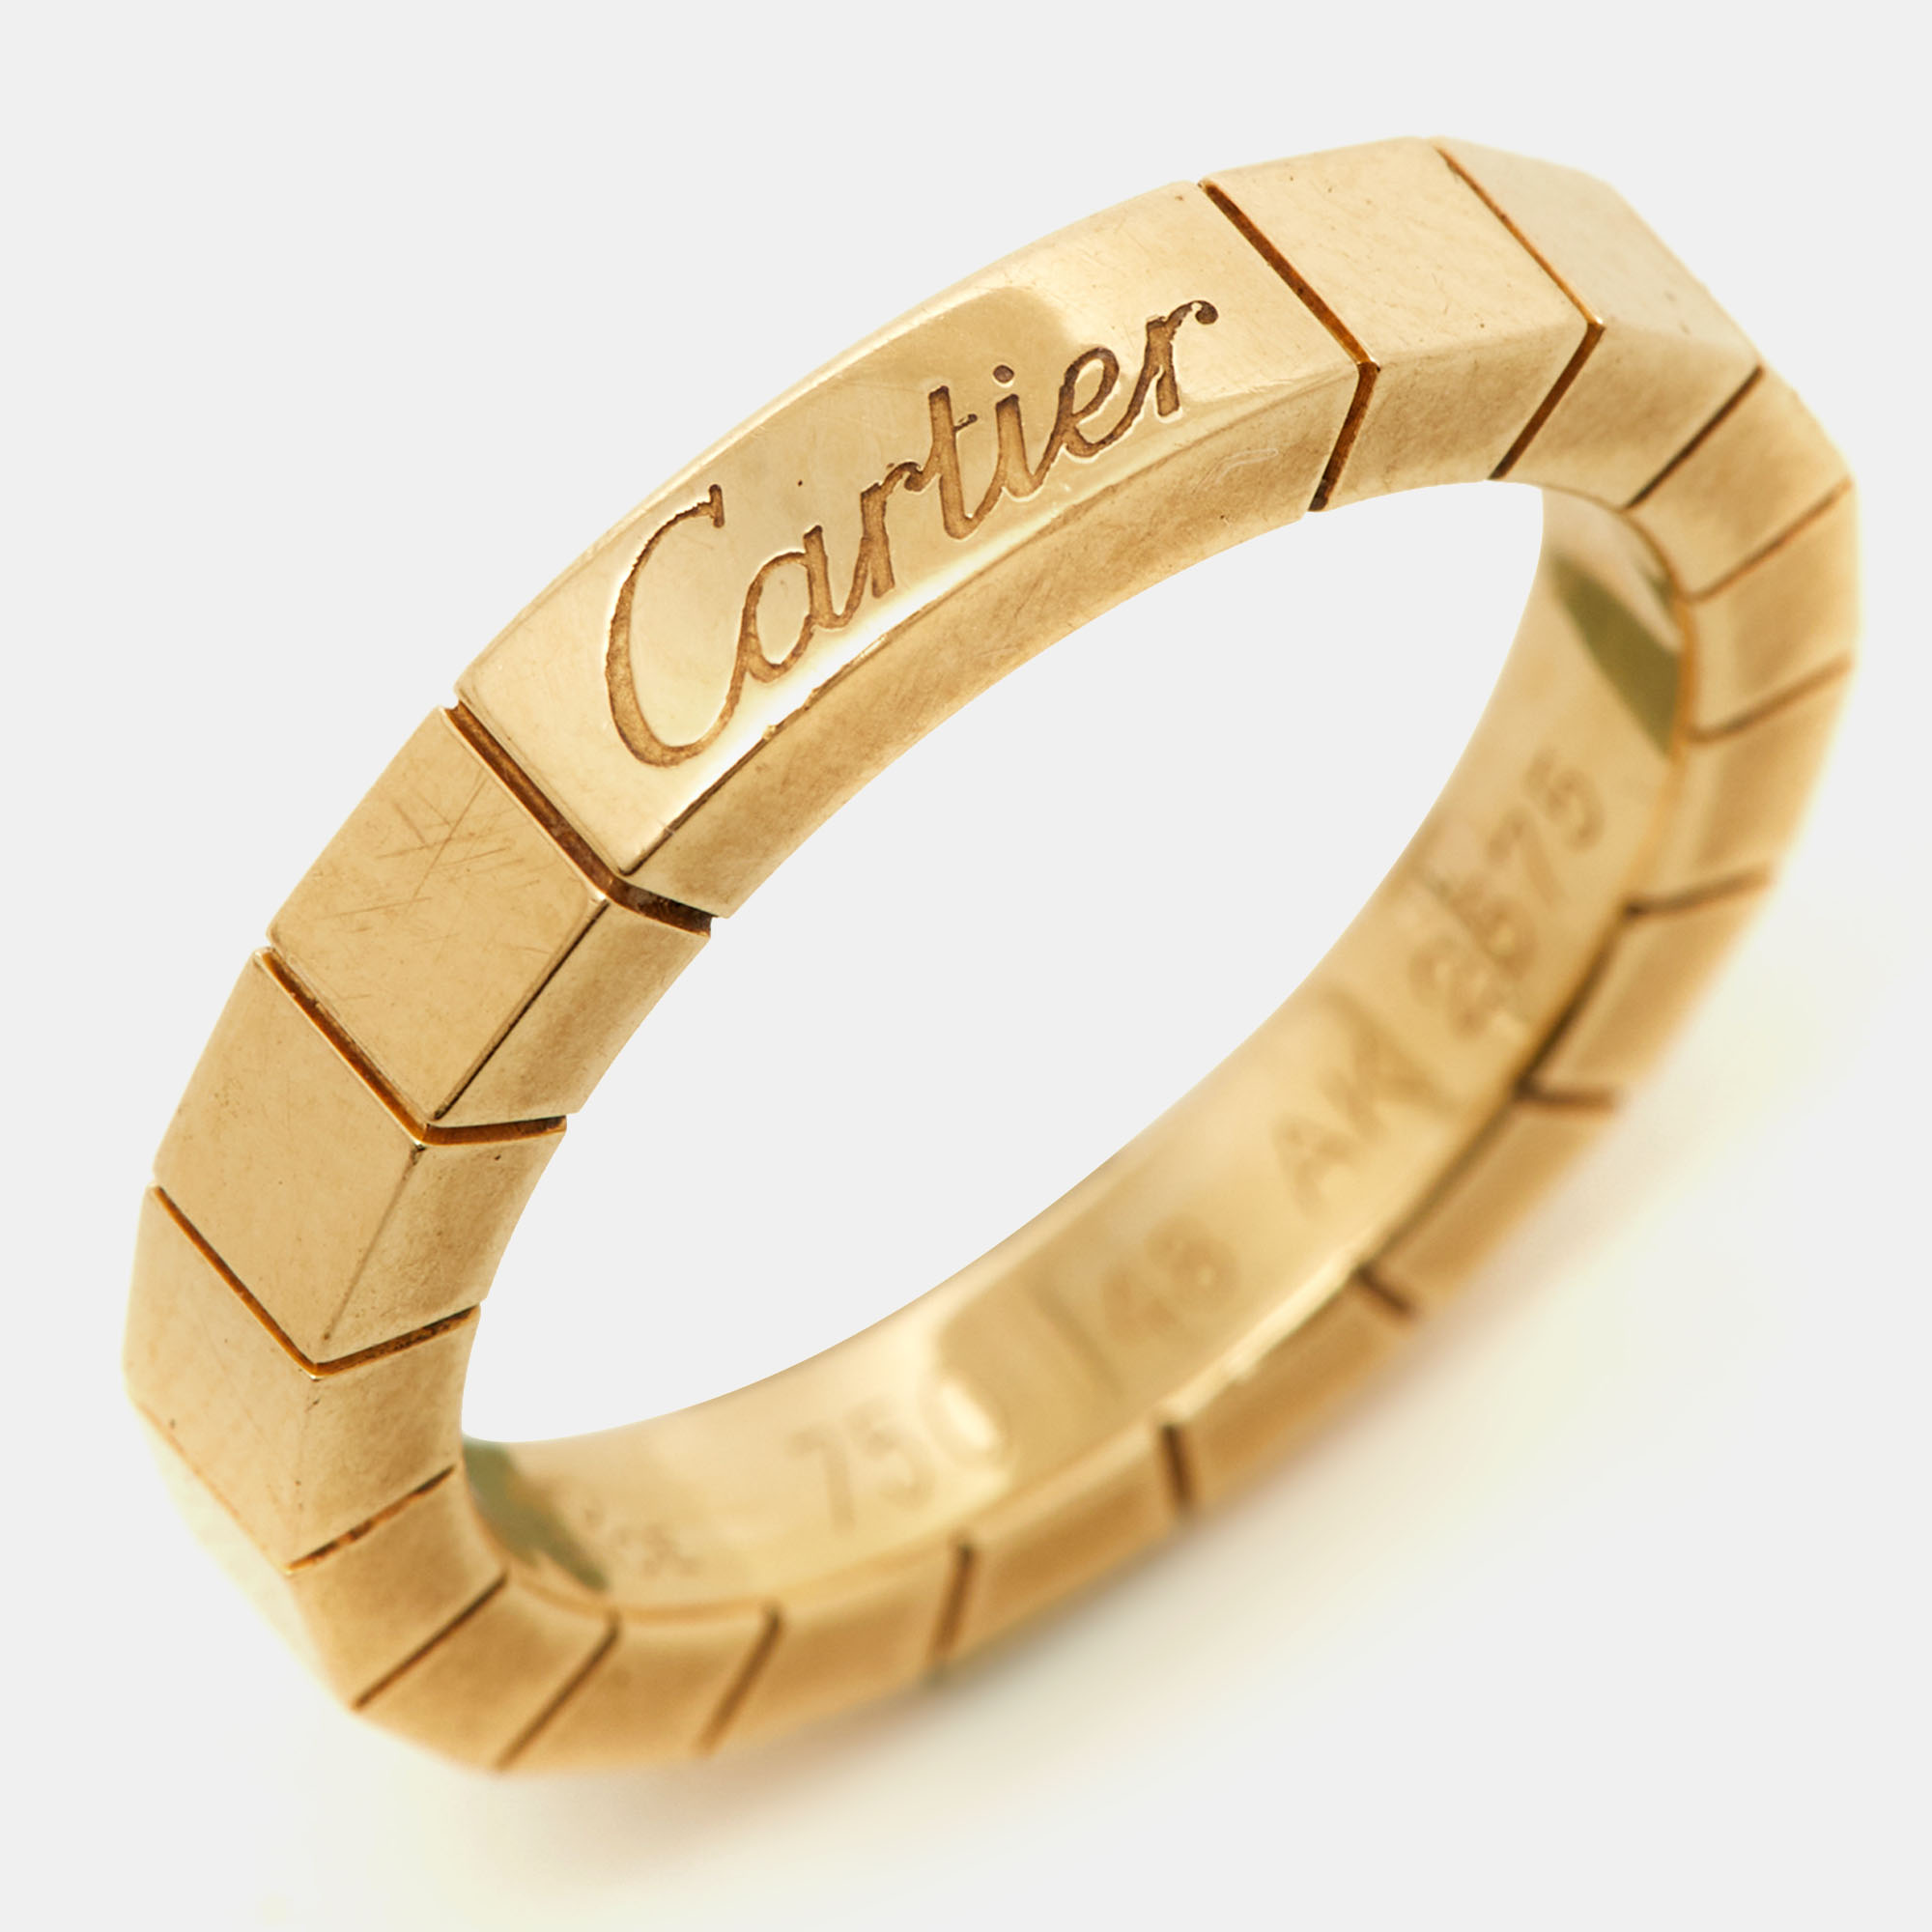 The Cartier Lanieres ring is a luxurious jewelry piece crafted from 18 karat yellow gold. This sleek and elegant design features thin parallel bands that wrap around the finger creating a modern and sophisticated look. Its a timeless and versatile accessory suitable for any occasion.